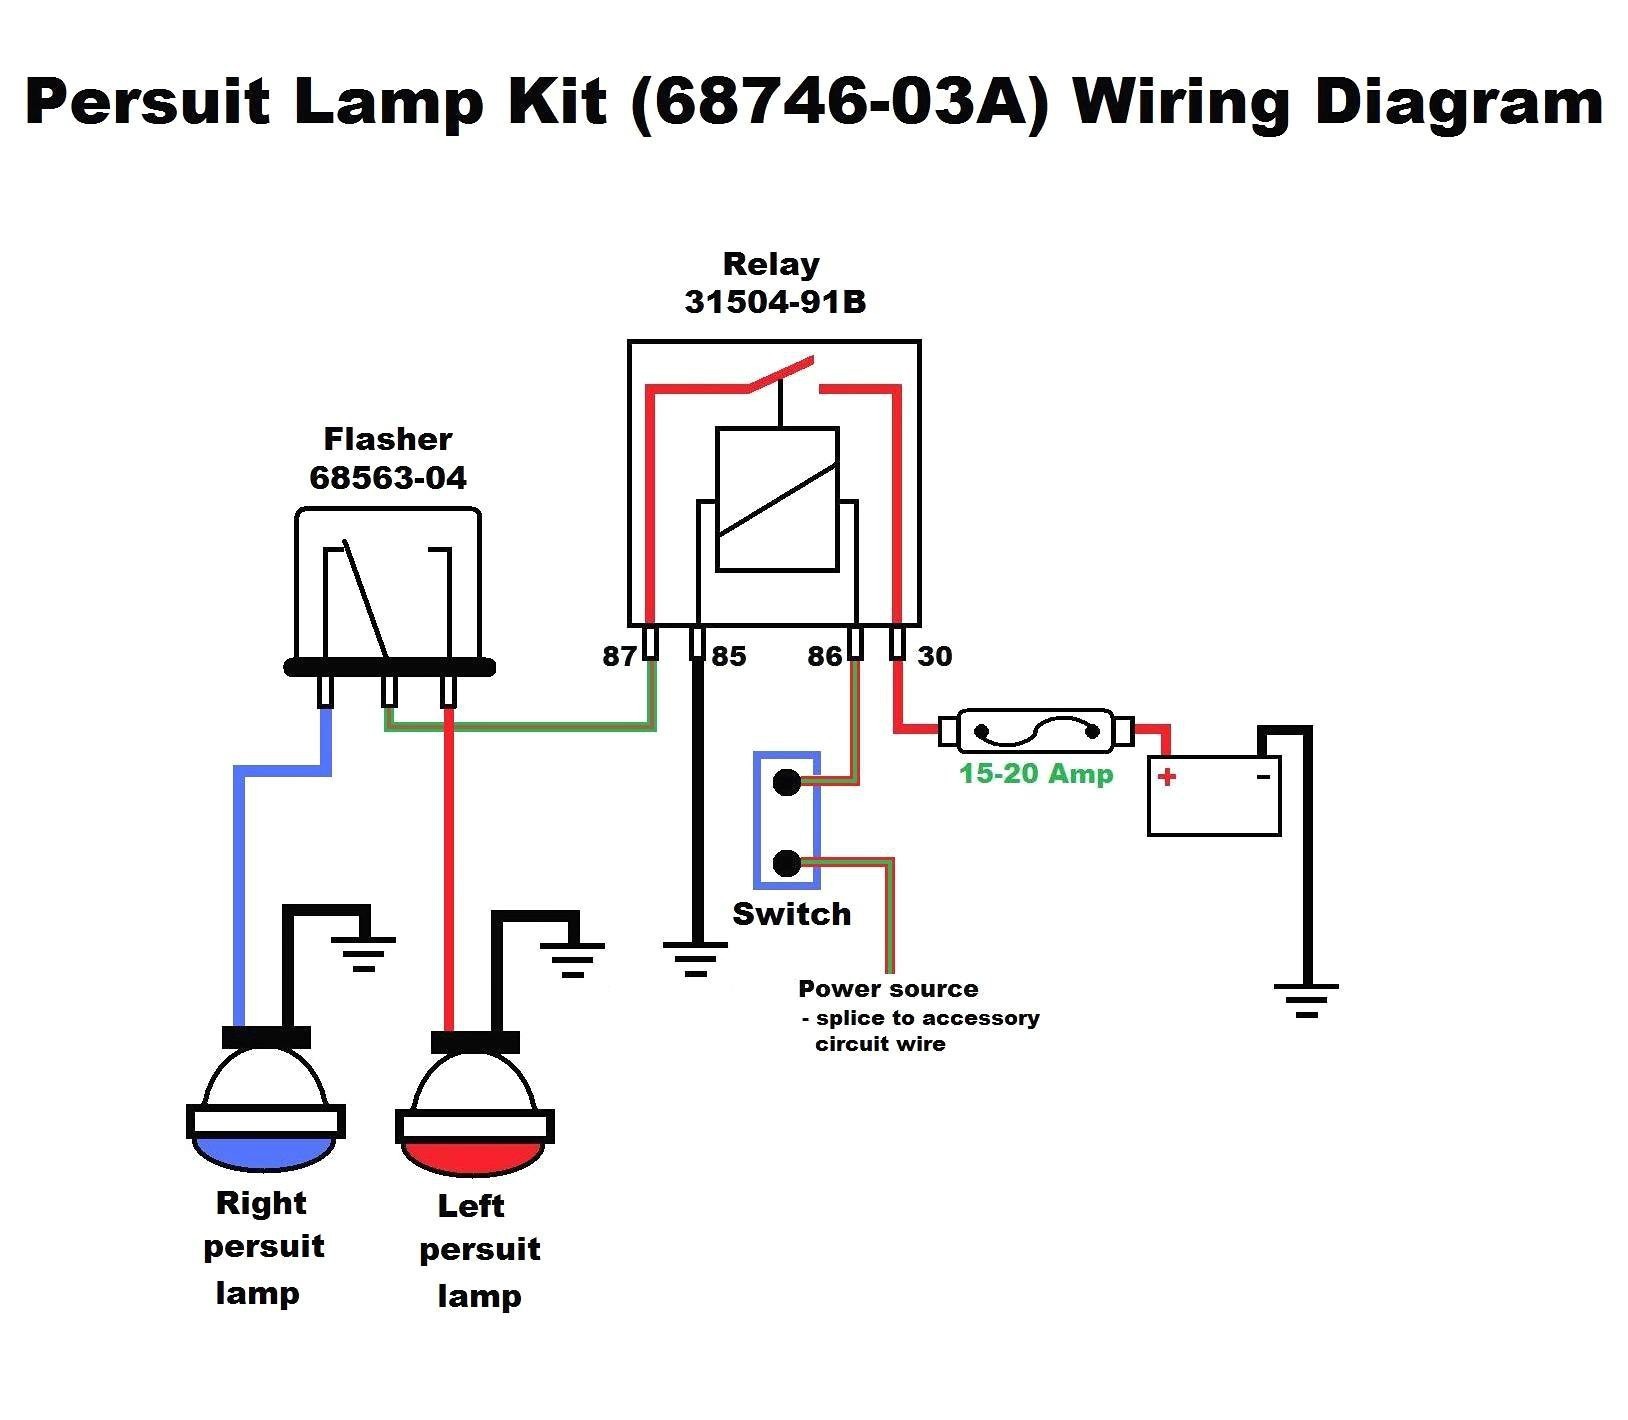 Wiring Diagram for Relay for Horn Best Flasher Relay Diagram Fresh Wiring Diagram for Car